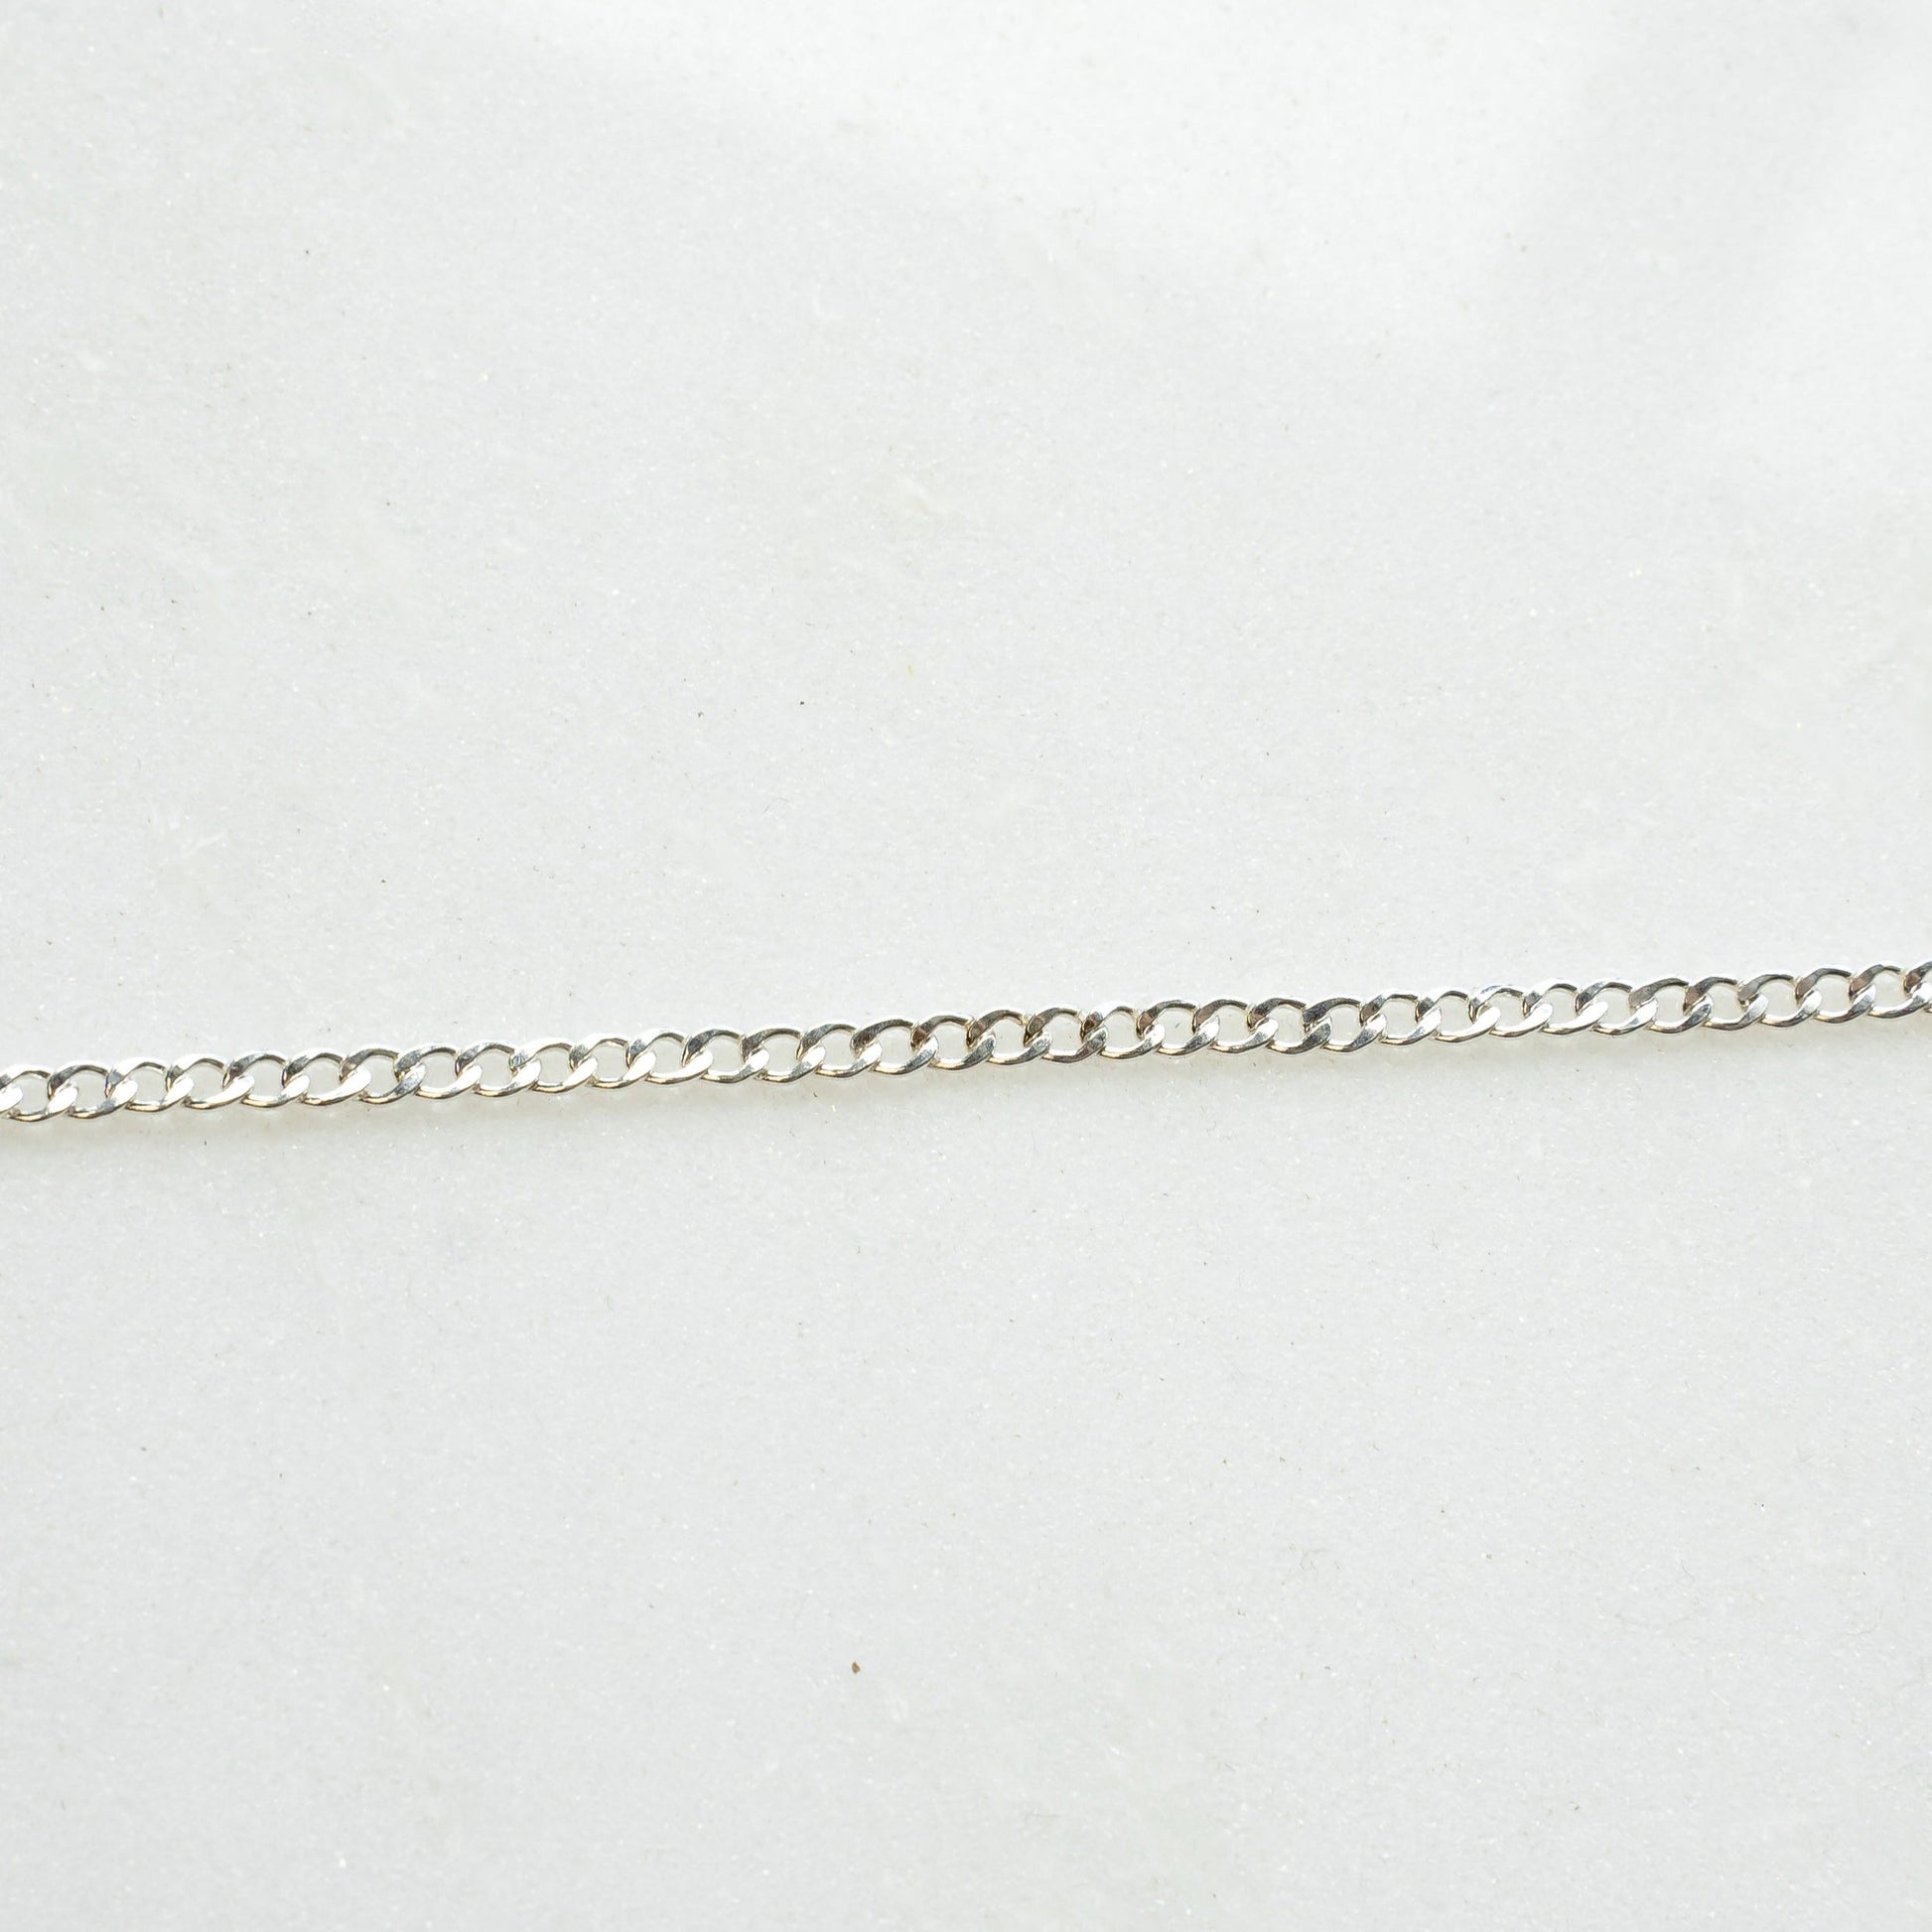 Lovely Links Permanent Jewelry JEWELRY The Sis Kiss Sterling Silver 3.3 mm Curb Link Cable Chain 15 Minutes